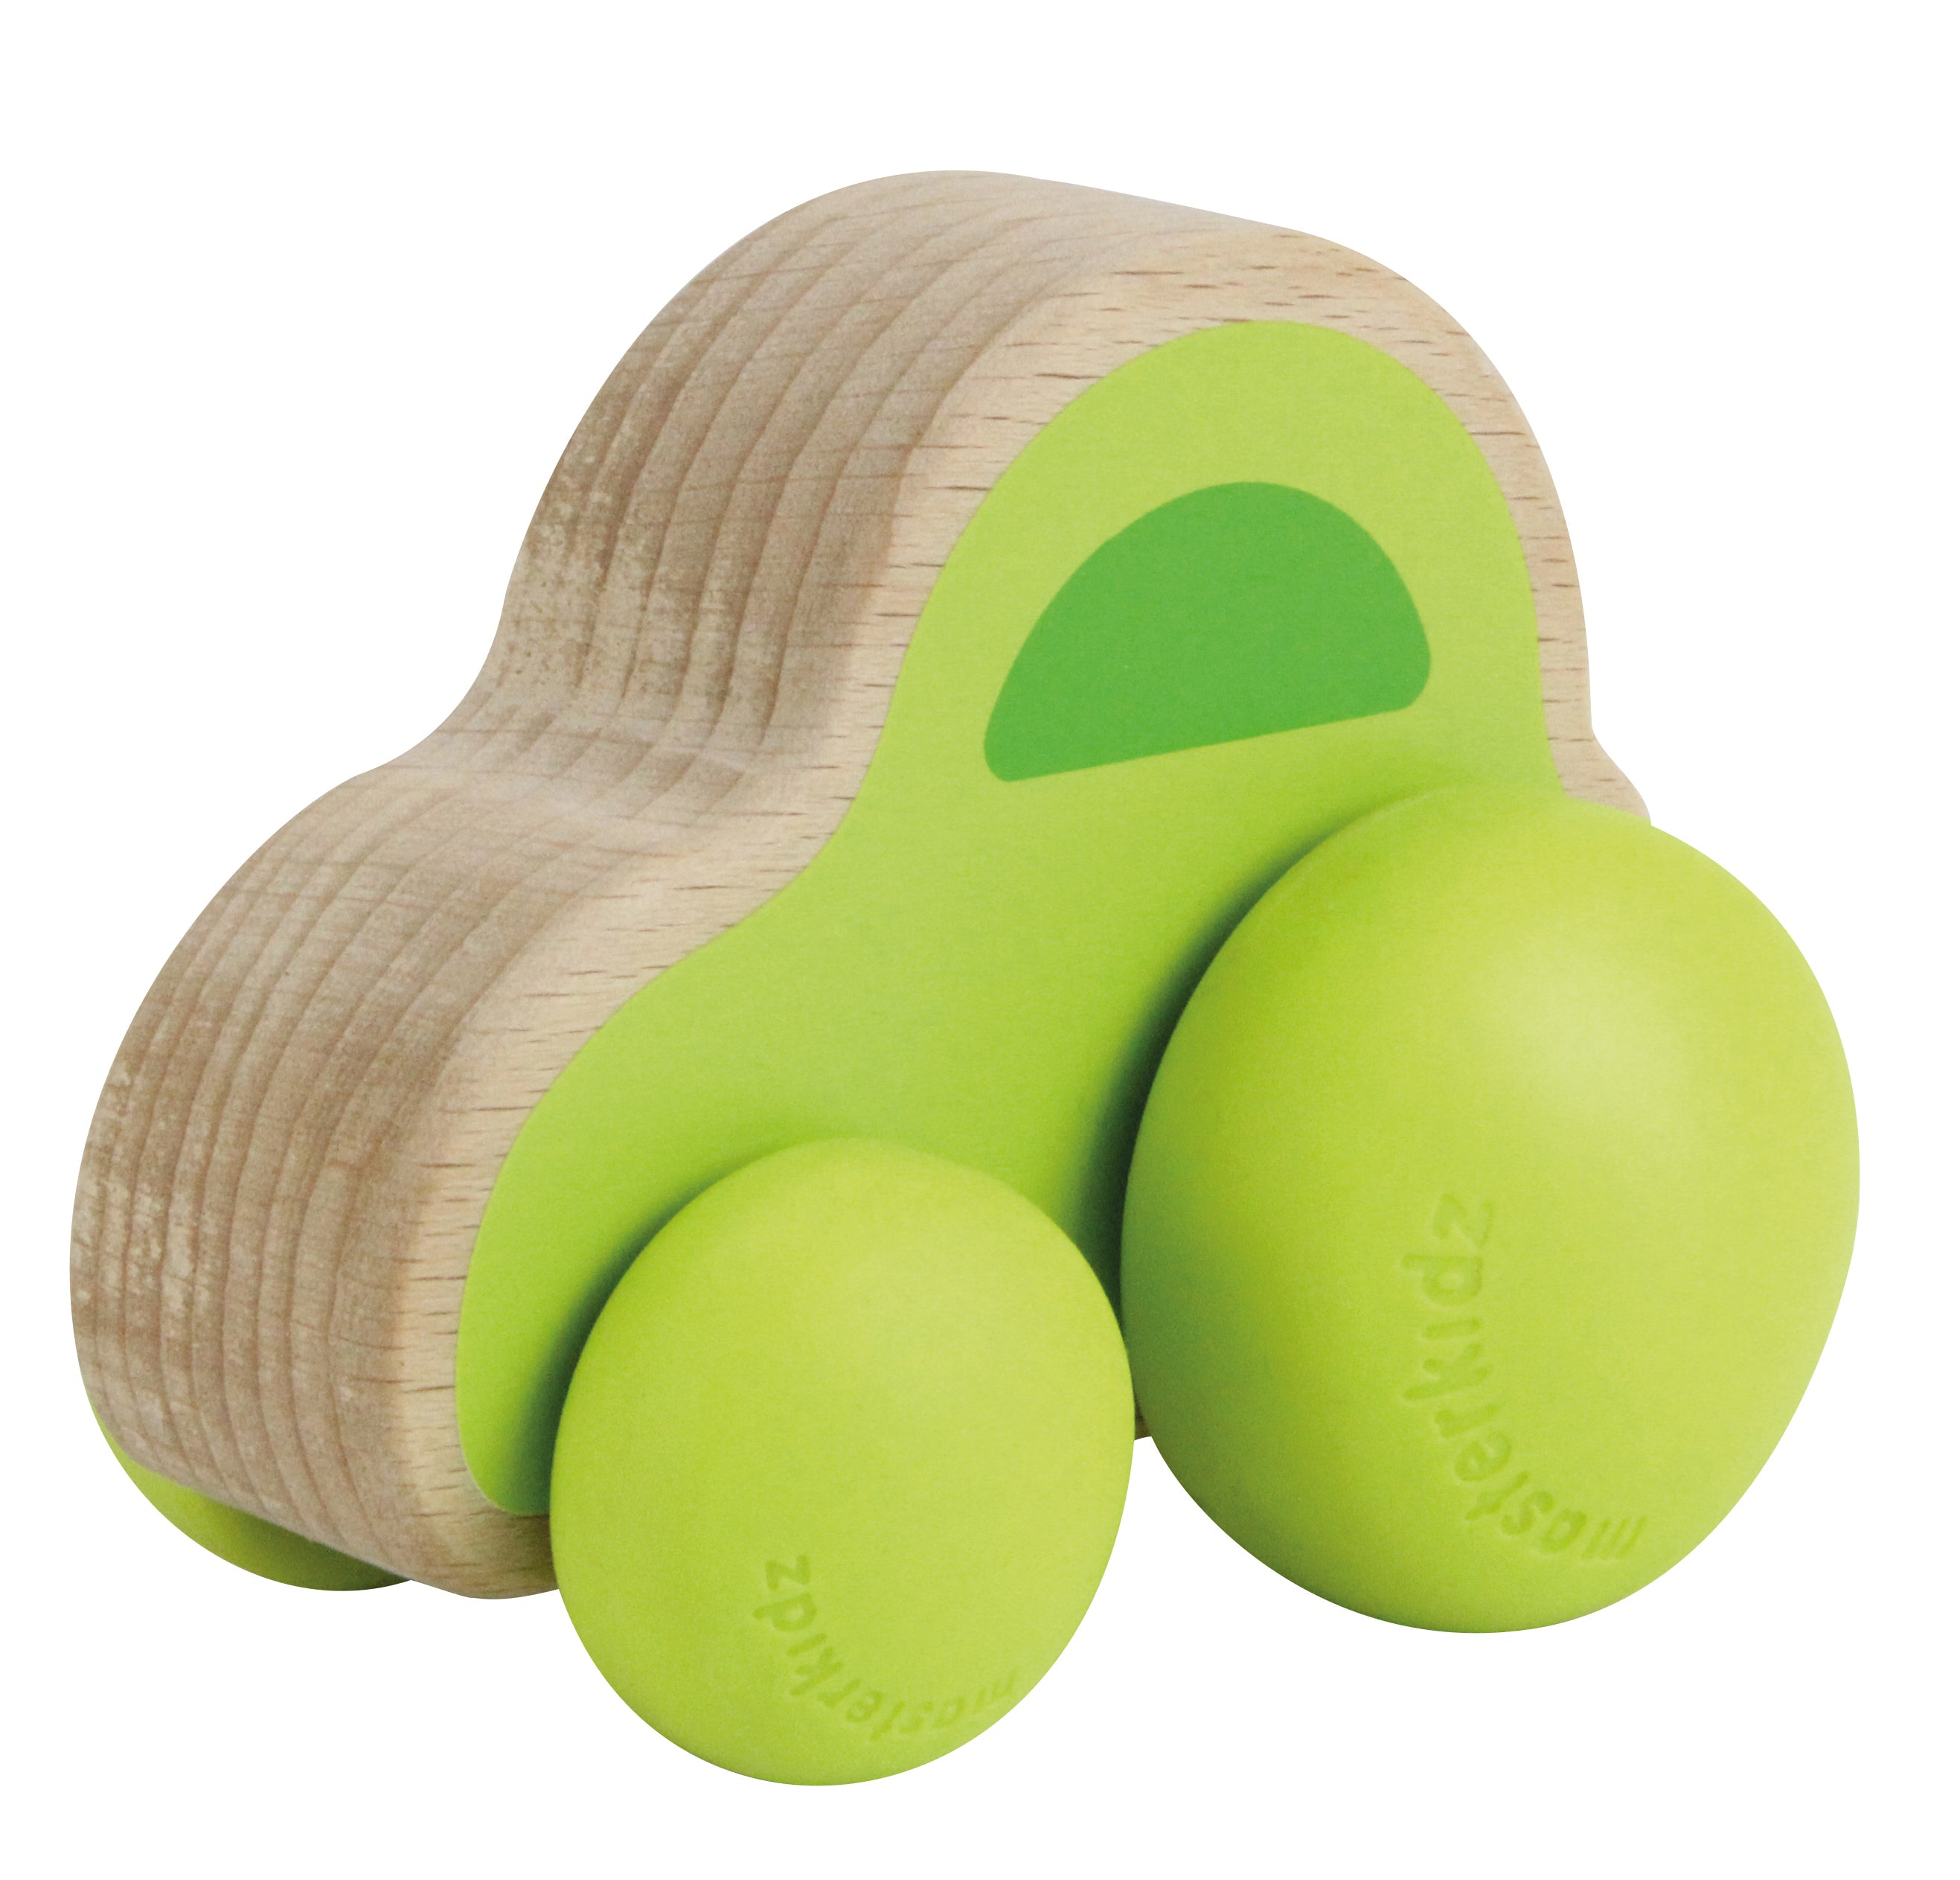 Lil' Rollerz Wooden Toy Family Car